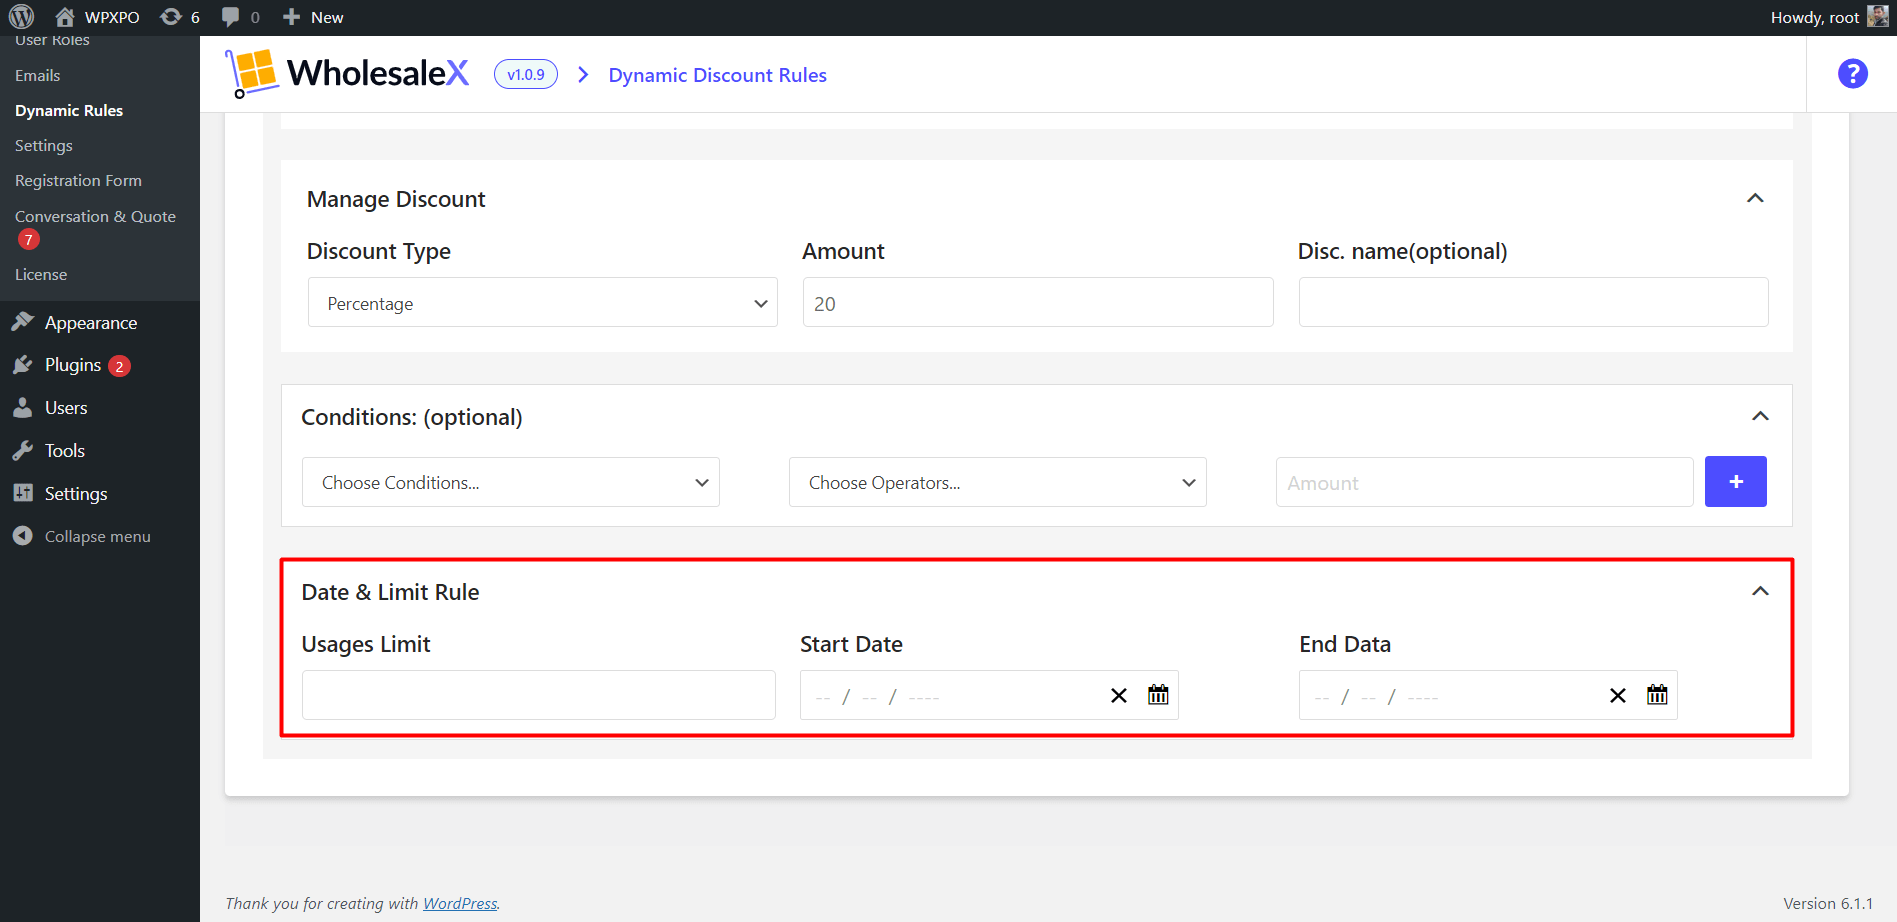 Optional Usages Limit, Start and End Date